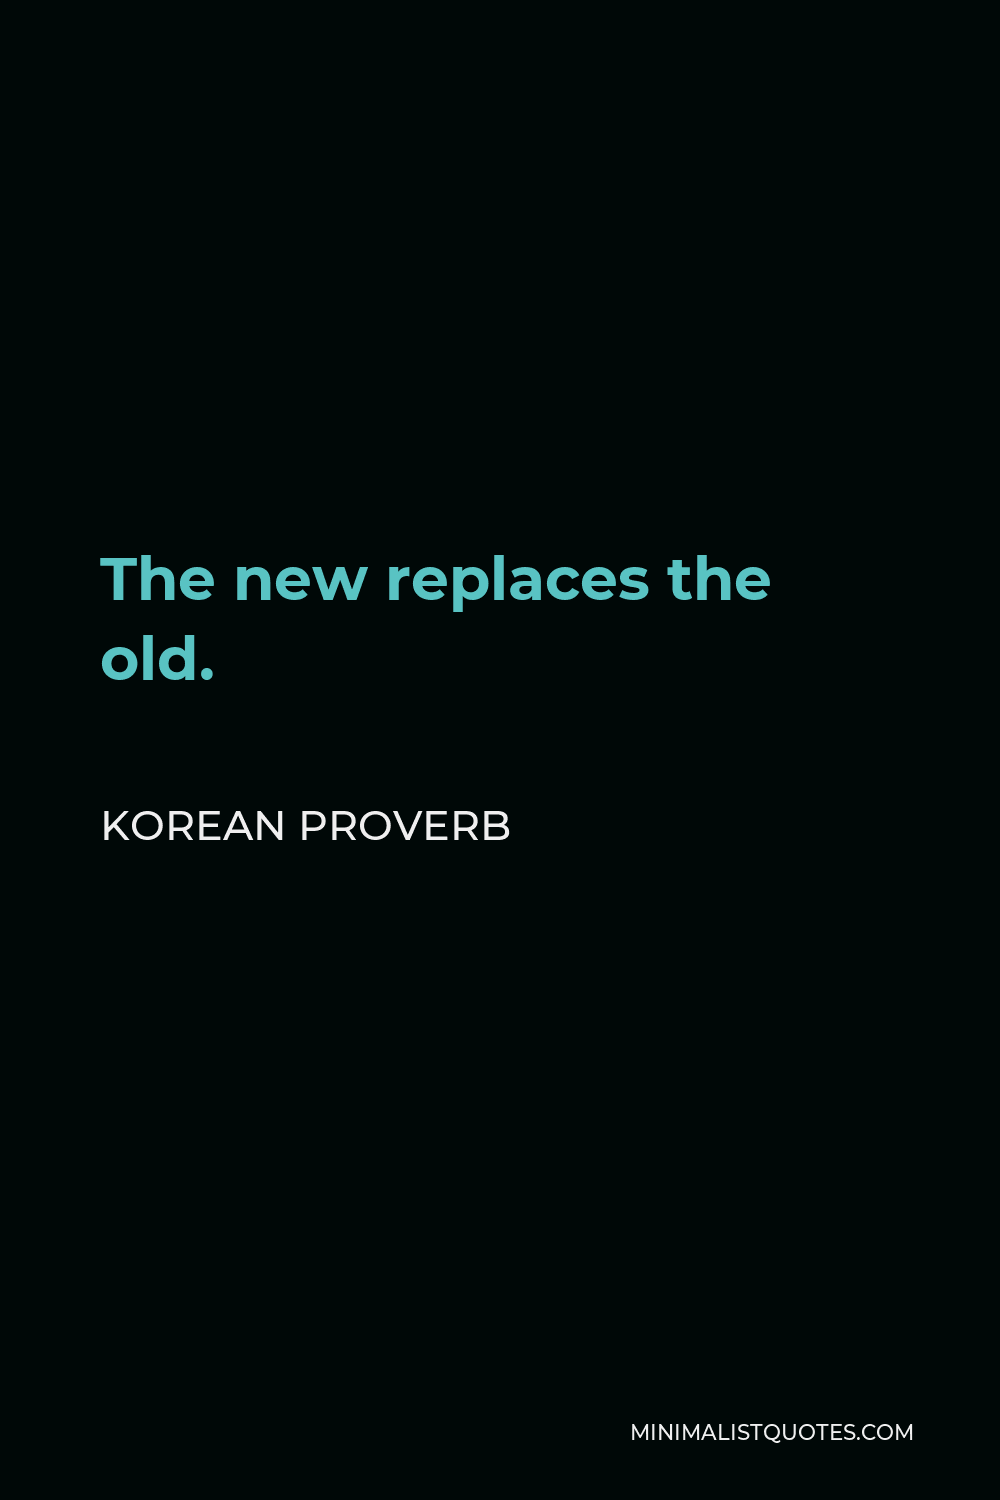 Korean Proverb Quote - The new replaces the old.